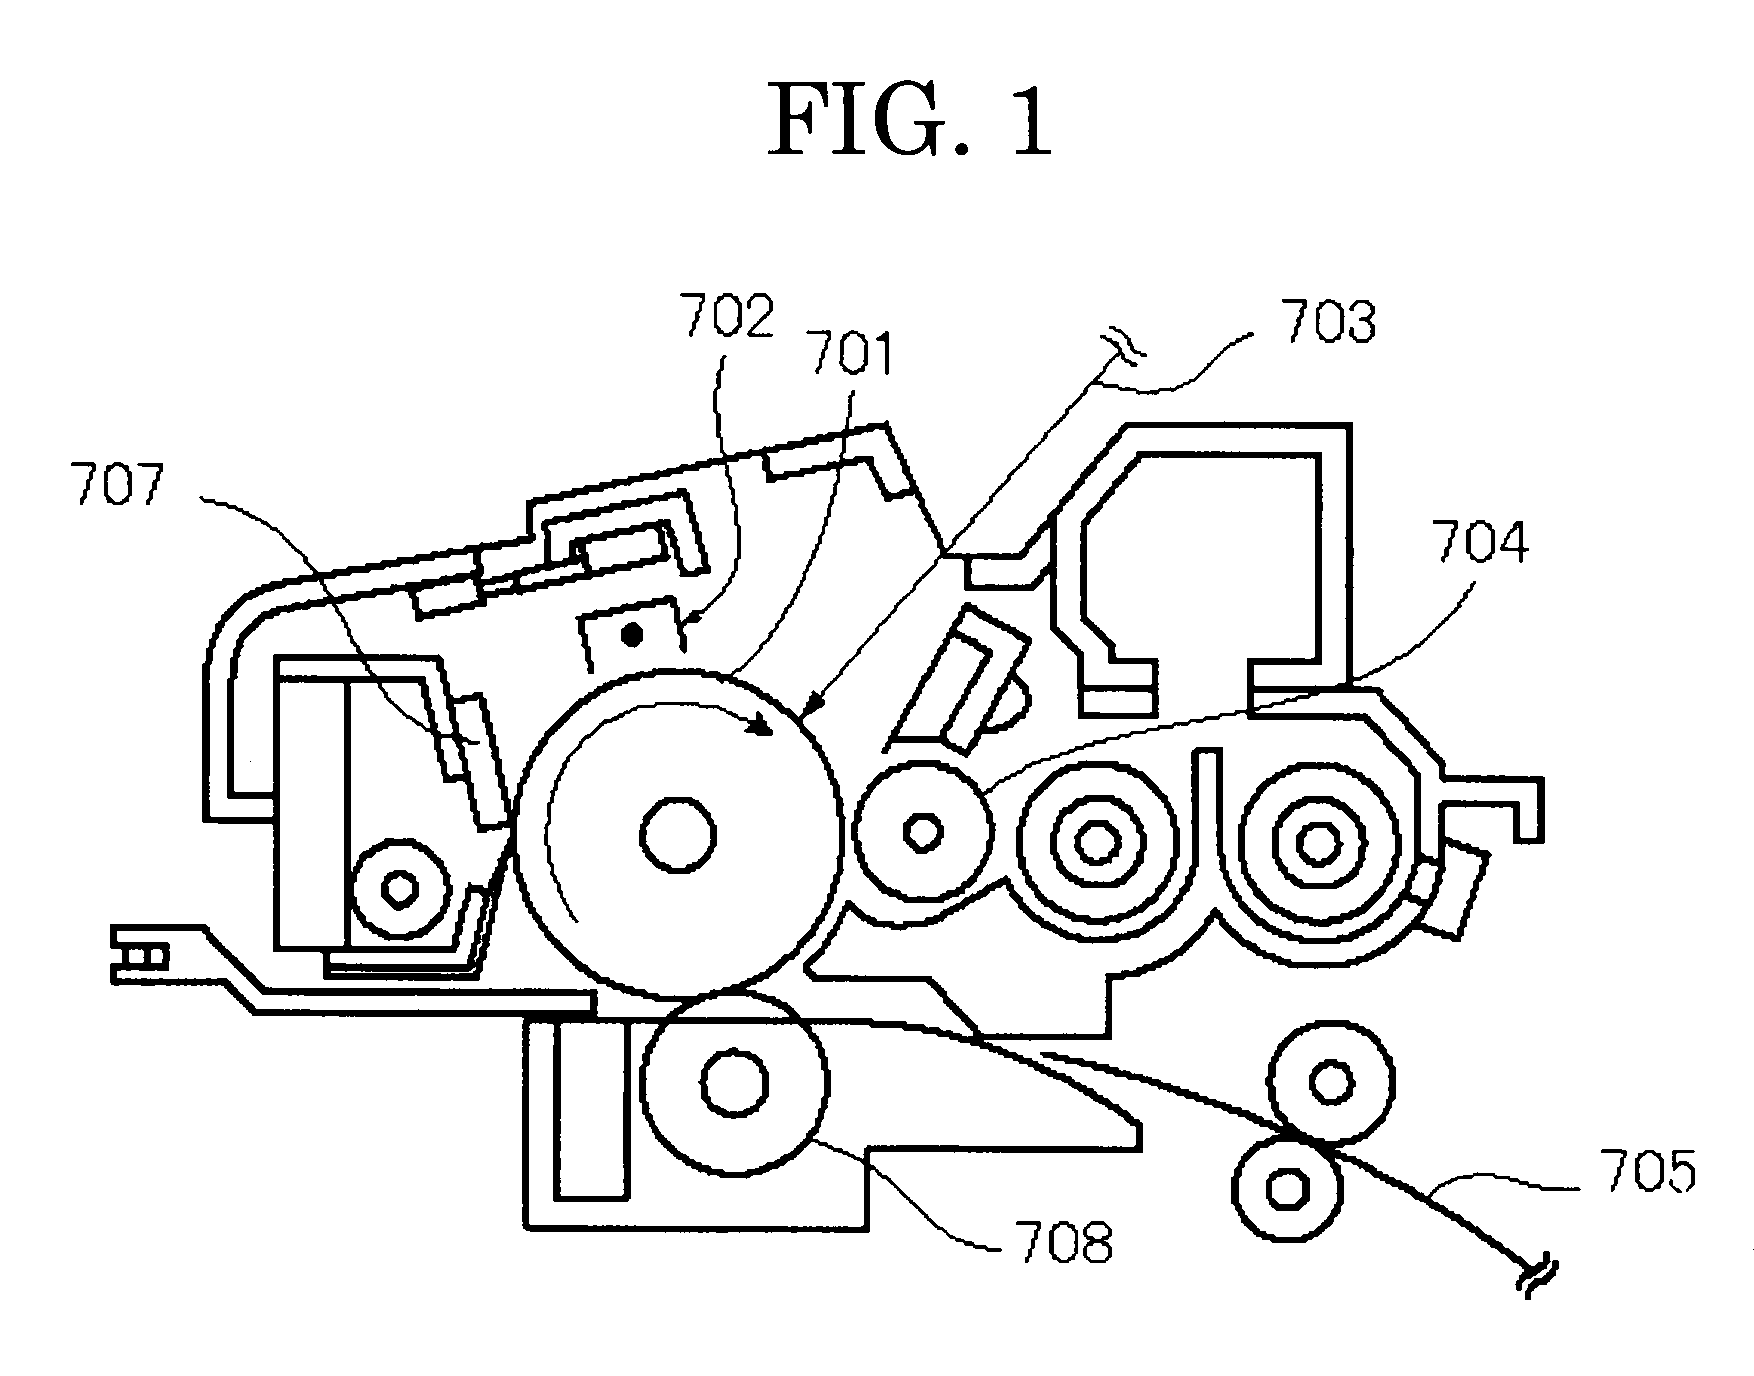 Toner for developing electrostatic charge image, image forming method and image forming apparatus